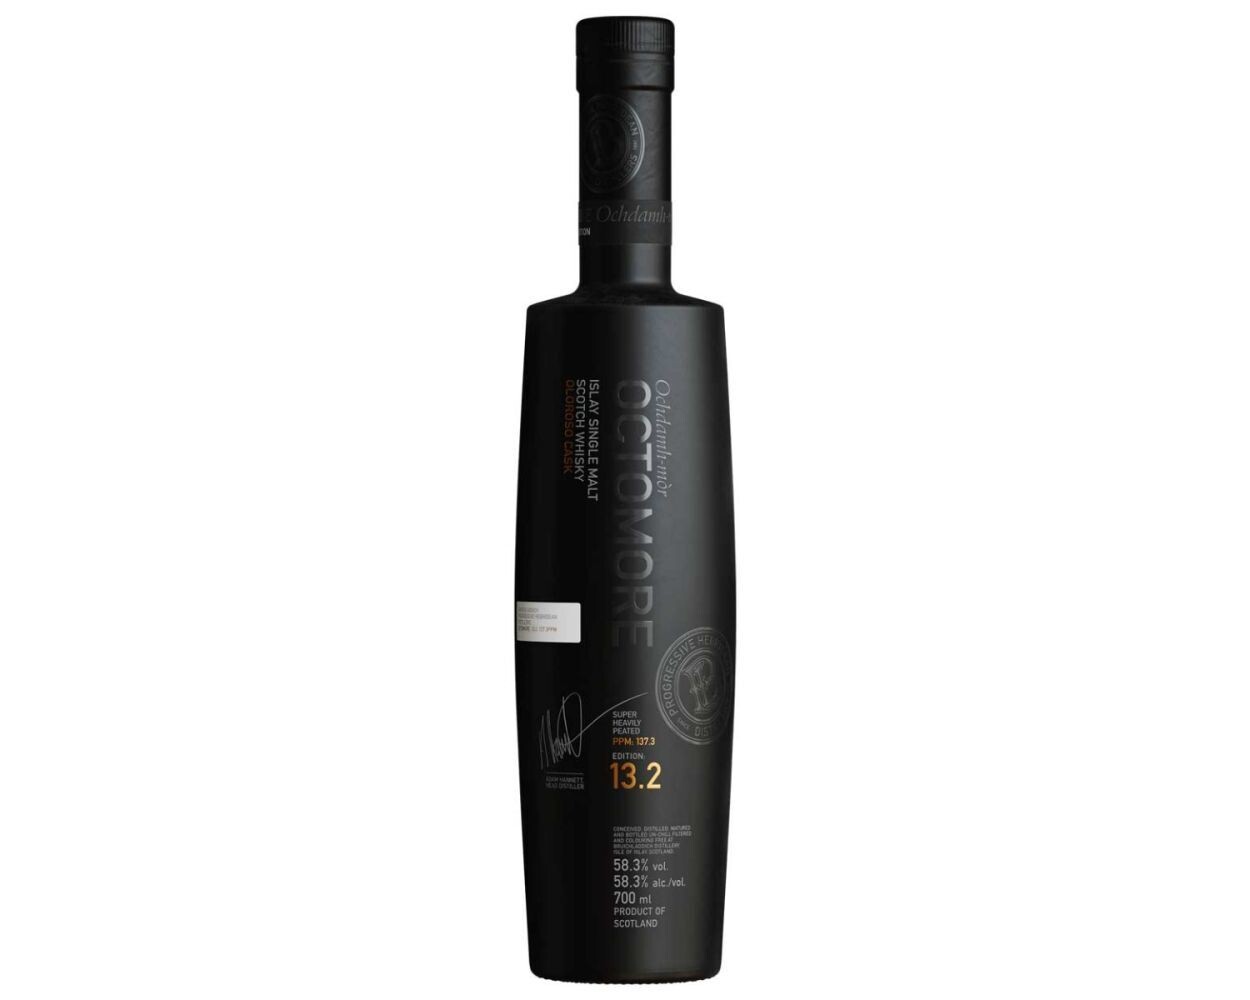 Octomore 13.2 58.3% 70CL